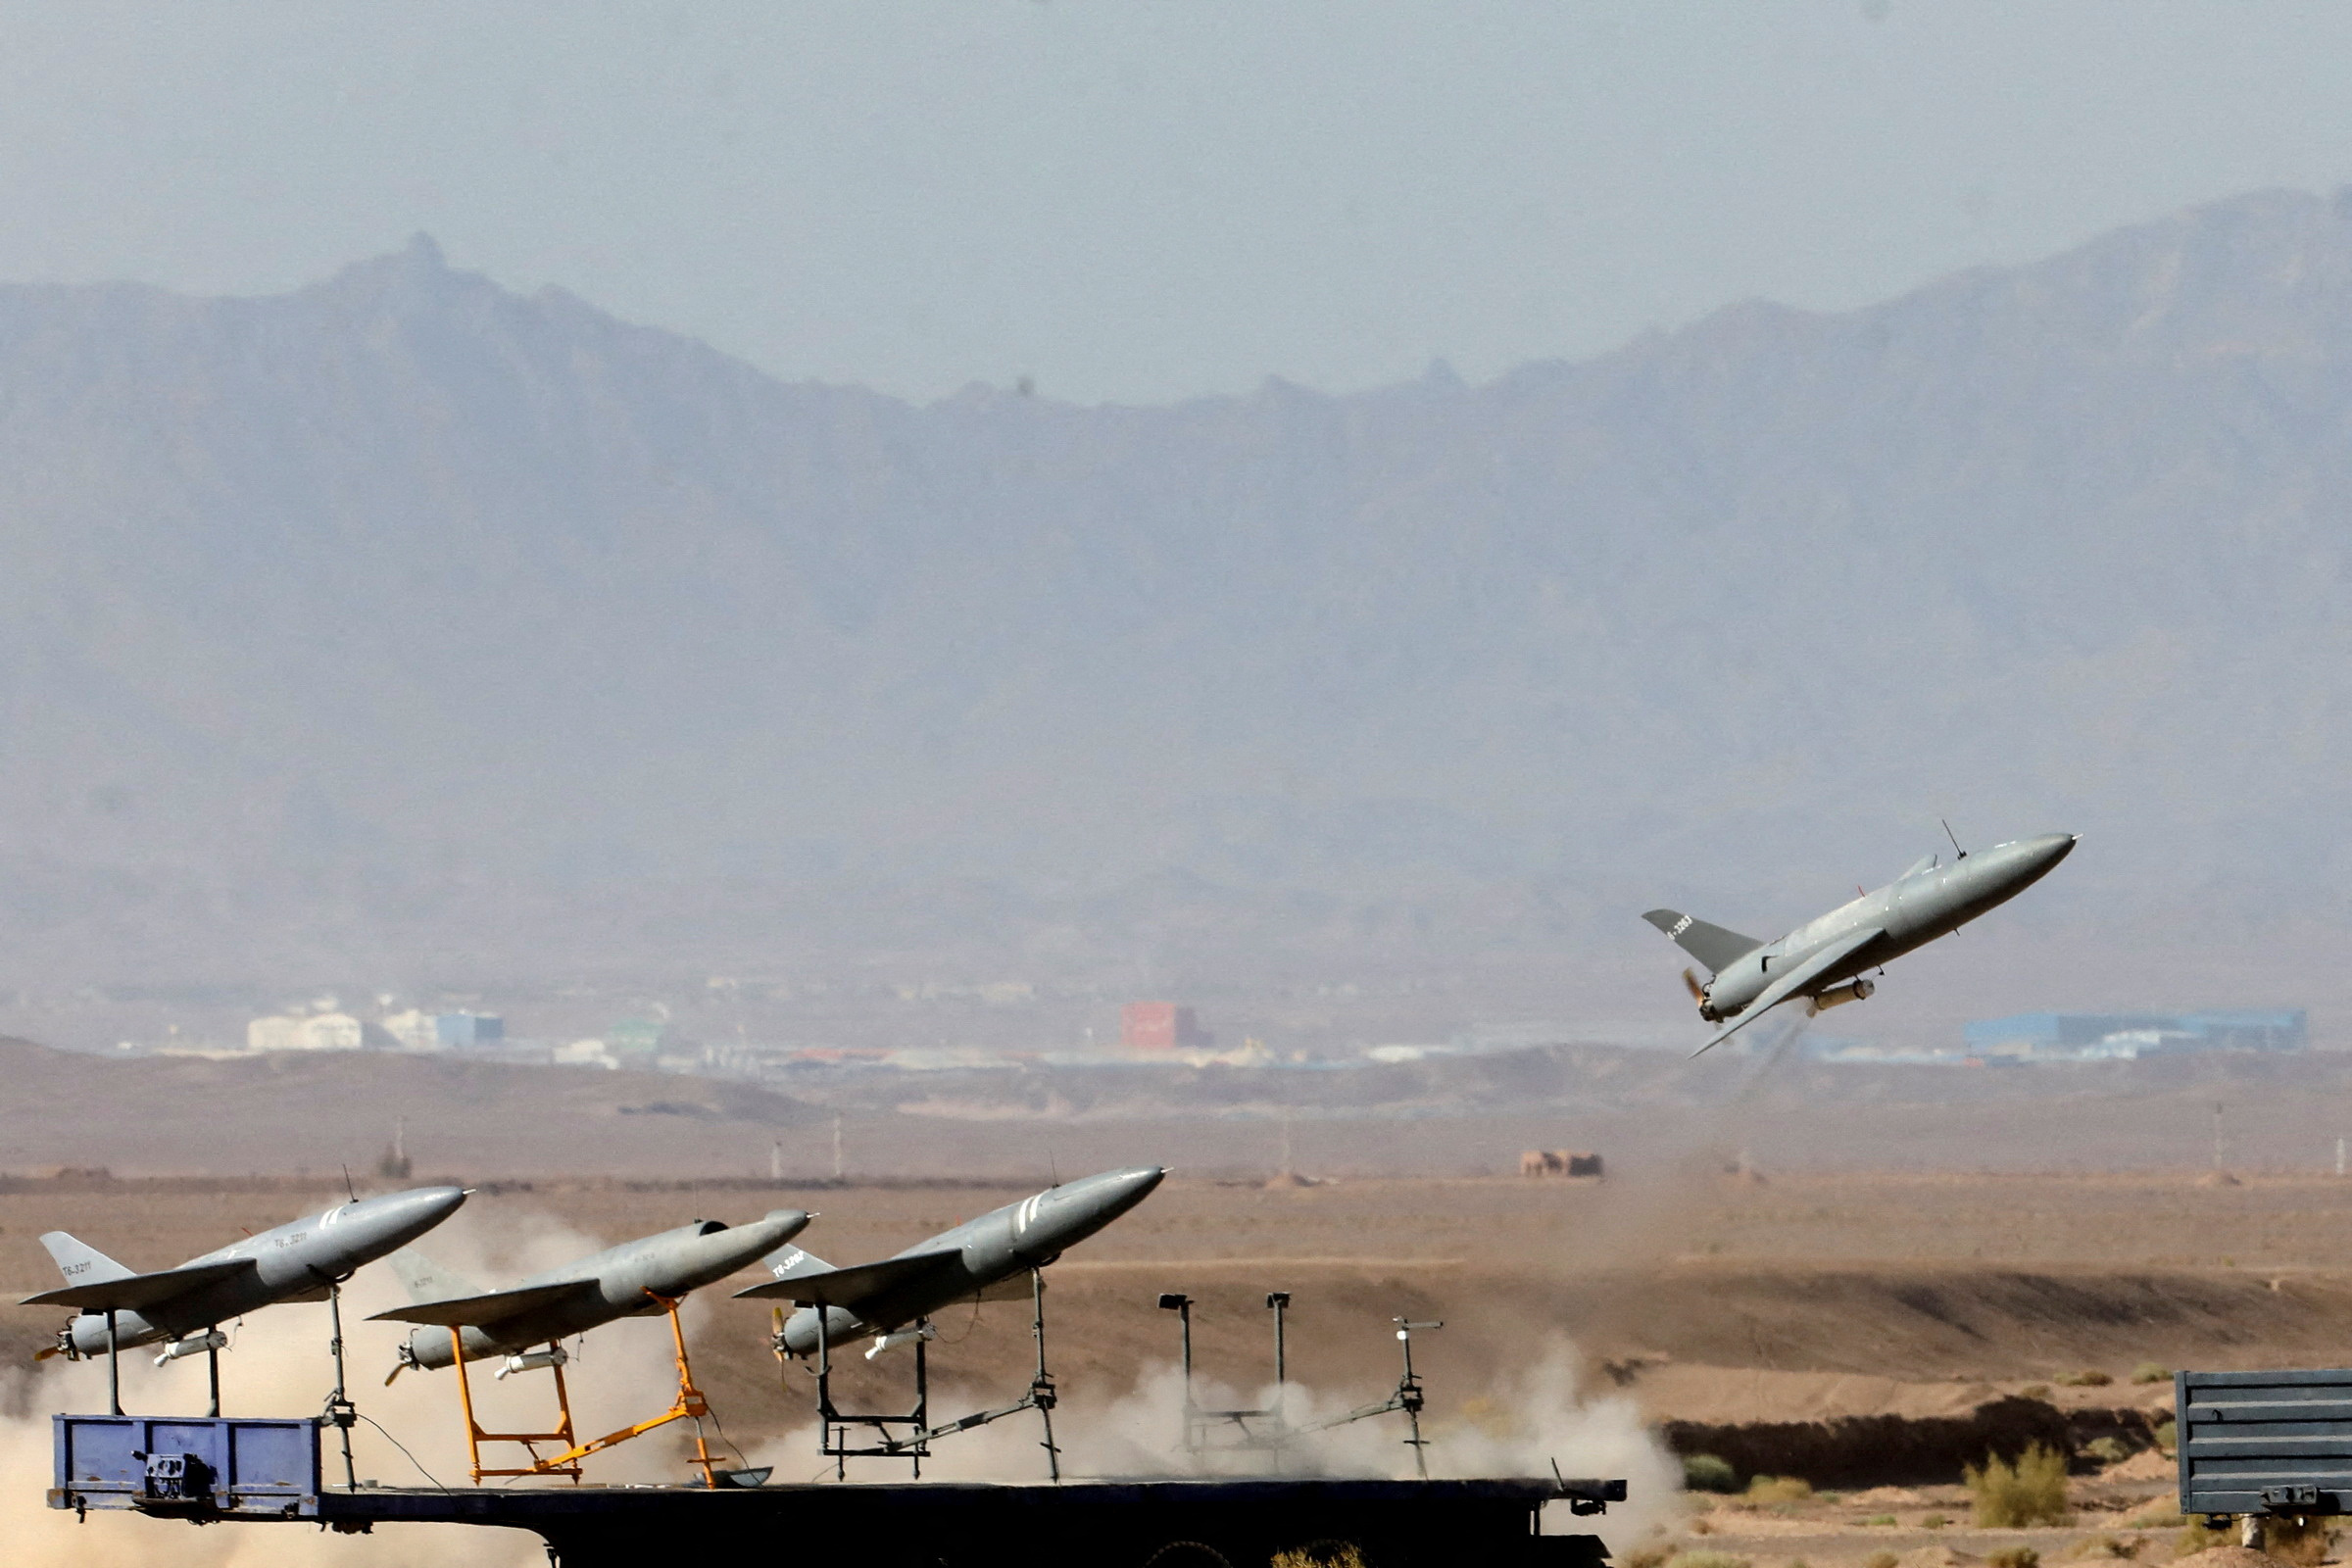 U.S. seeking to make it harder for Iran to sell drones to Russia